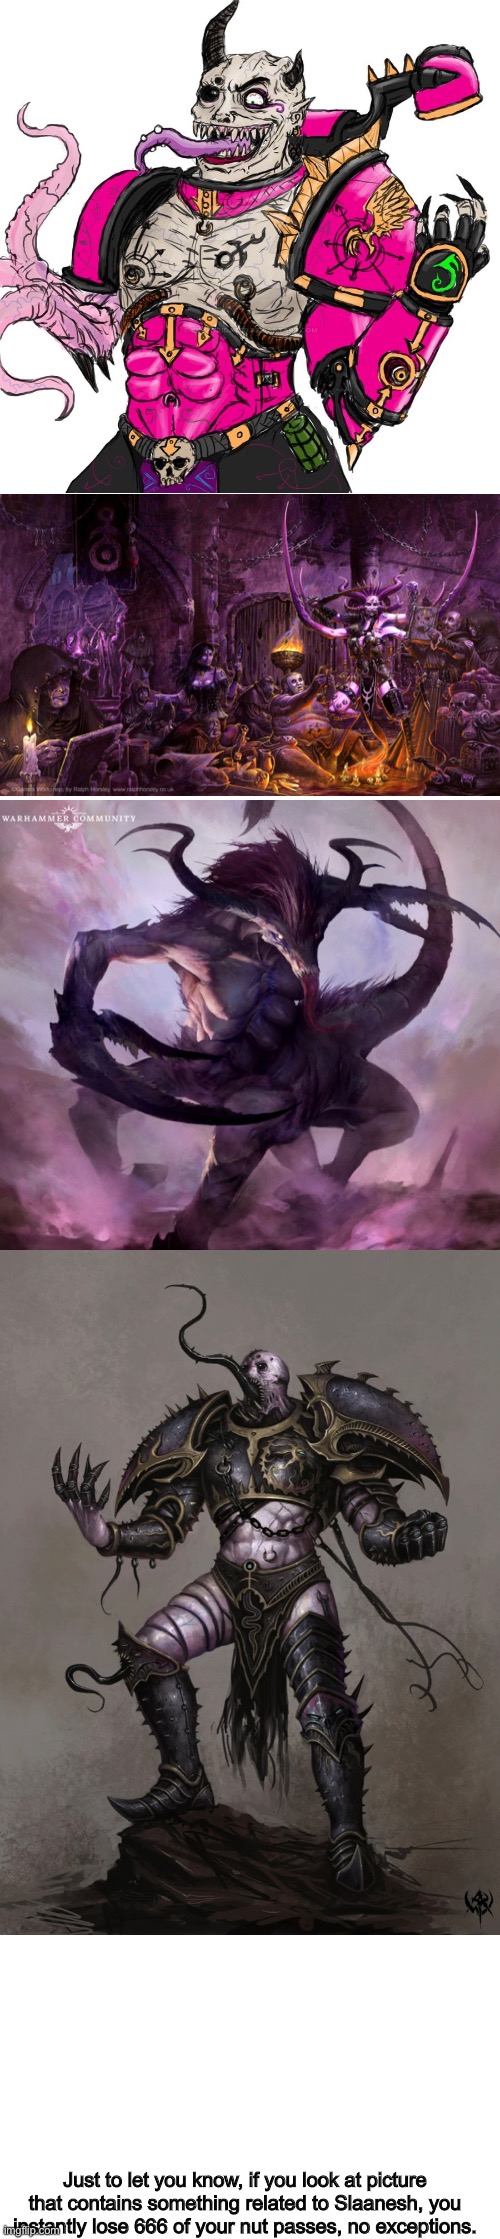 Slaanesh | Just to let you know, if you look at picture that contains something related to Slaanesh, you instantly lose 666 of your nut passes, no exceptions. | image tagged in slaanesh,no nut november | made w/ Imgflip meme maker